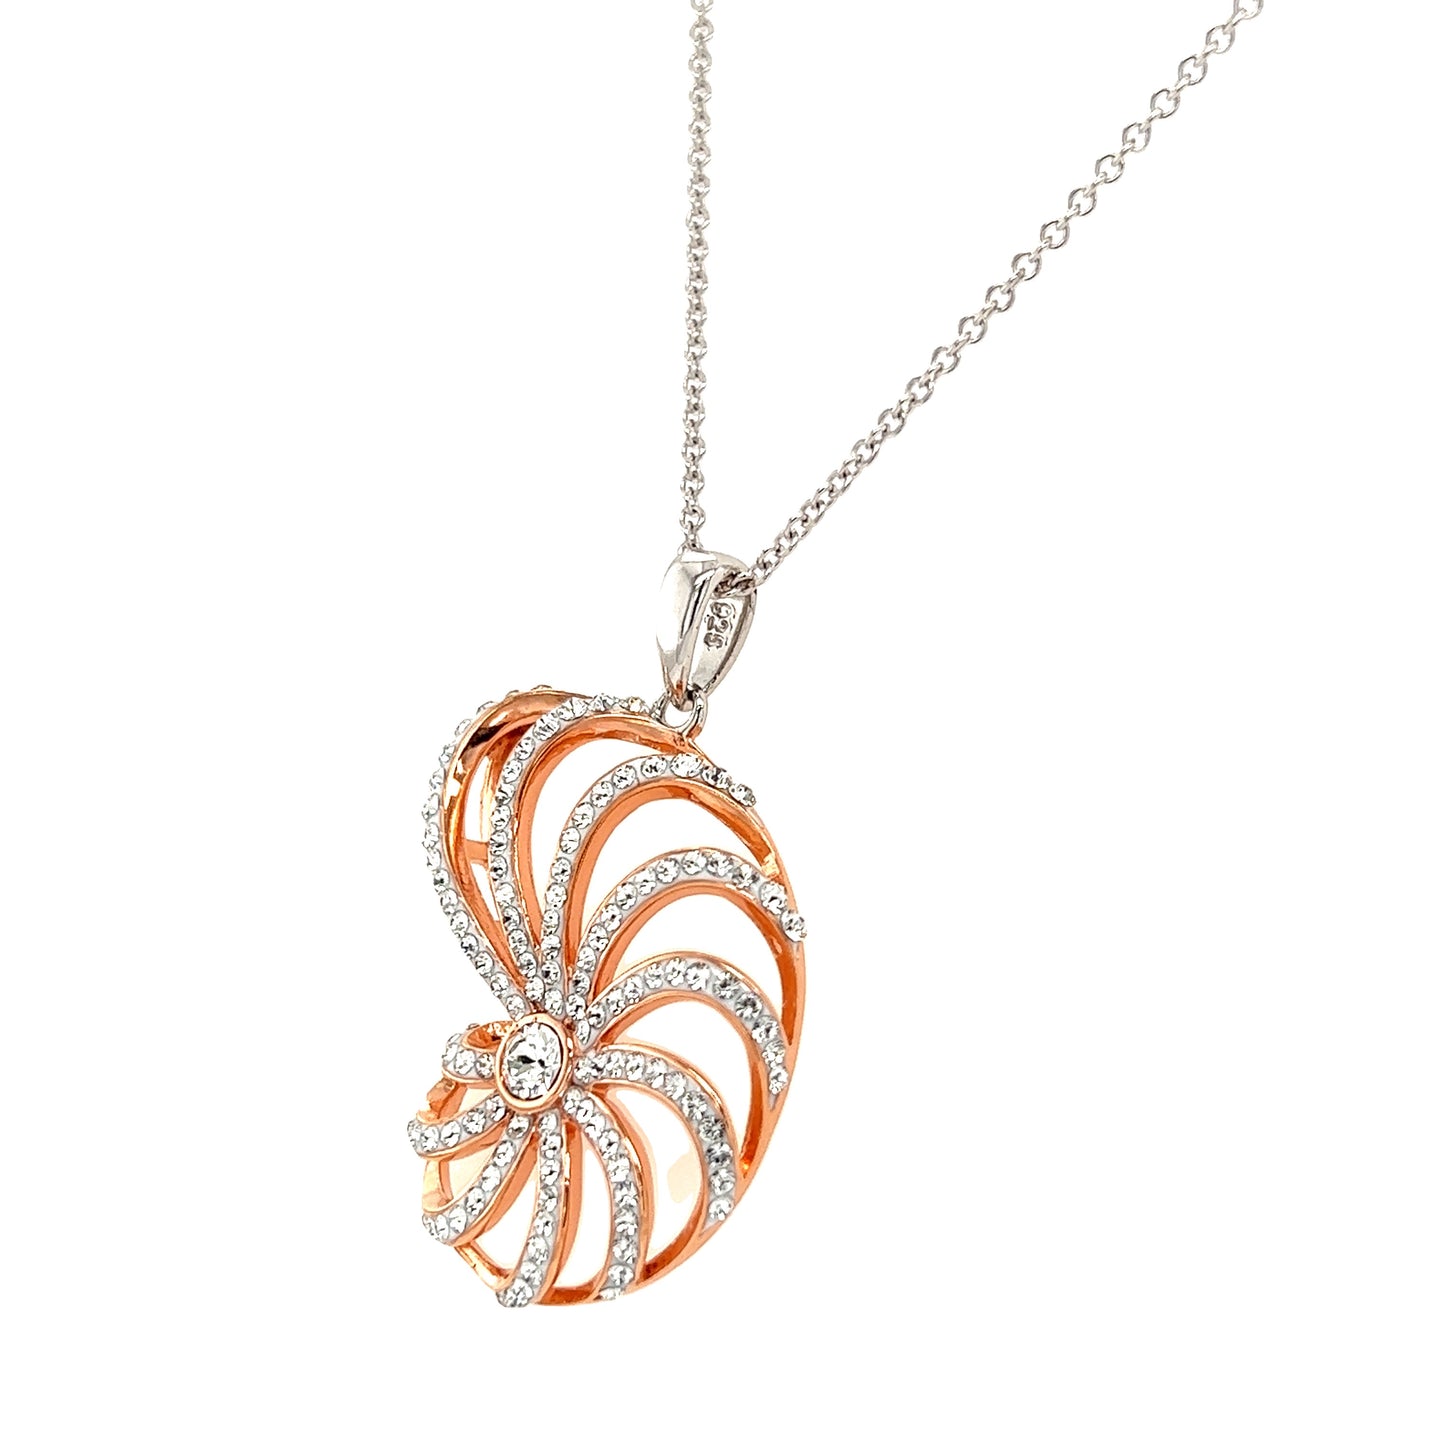 Nautilus Shell Necklace with Rose Gold Plate and White Crystals in Sterling Silver Right Side View